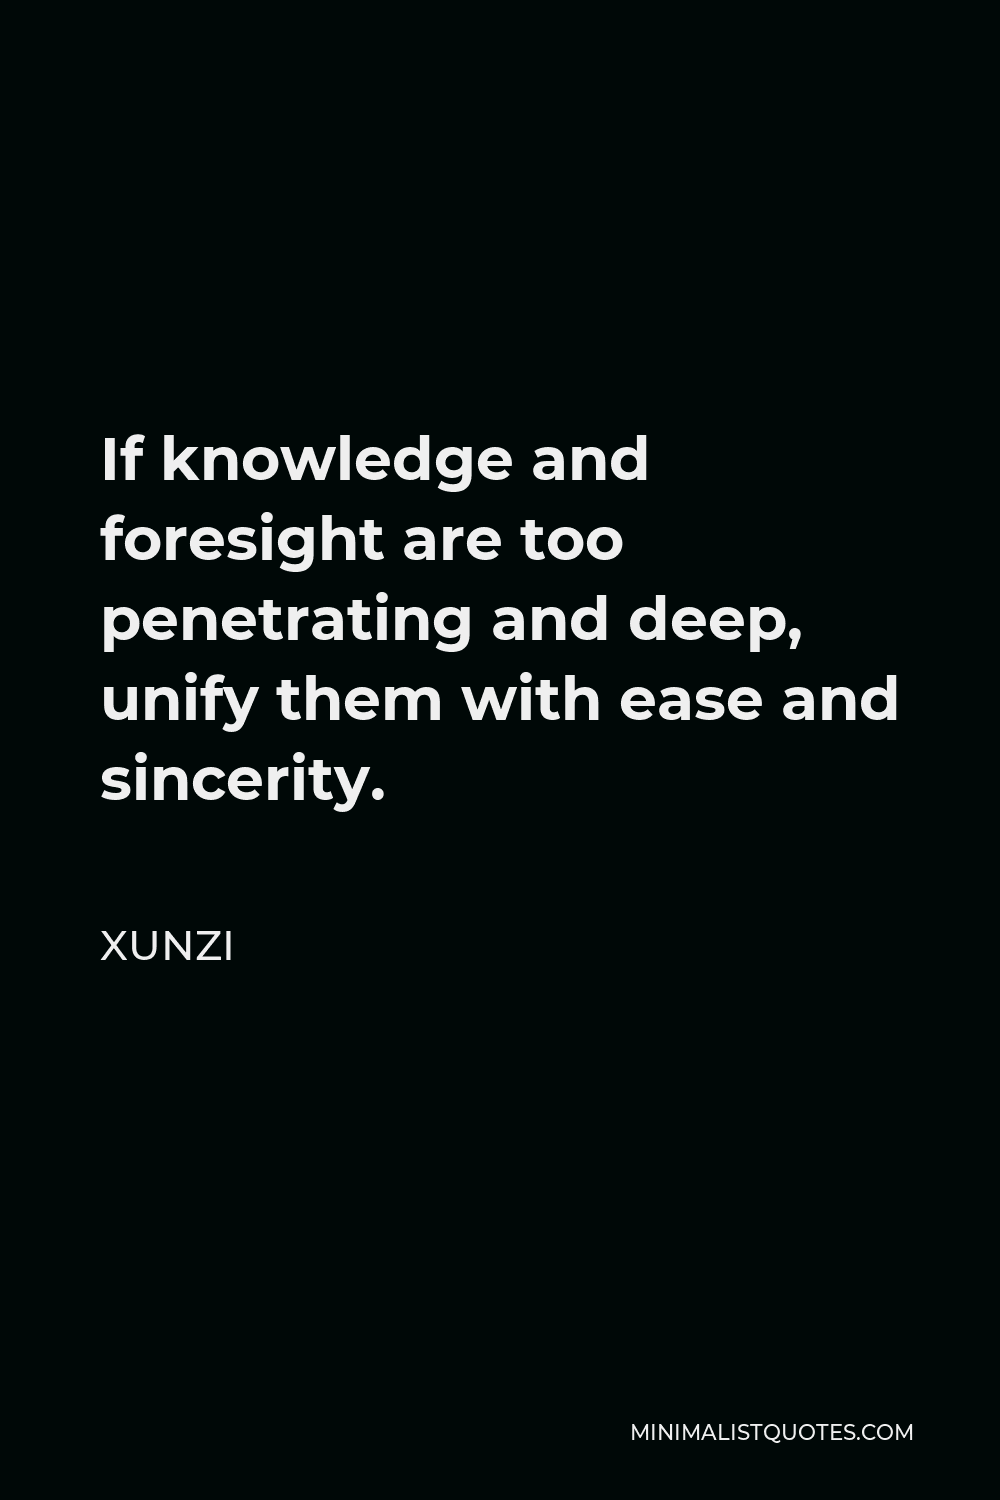 Xunzi Quote - If knowledge and foresight are too penetrating and deep, unify them with ease and sincerity.